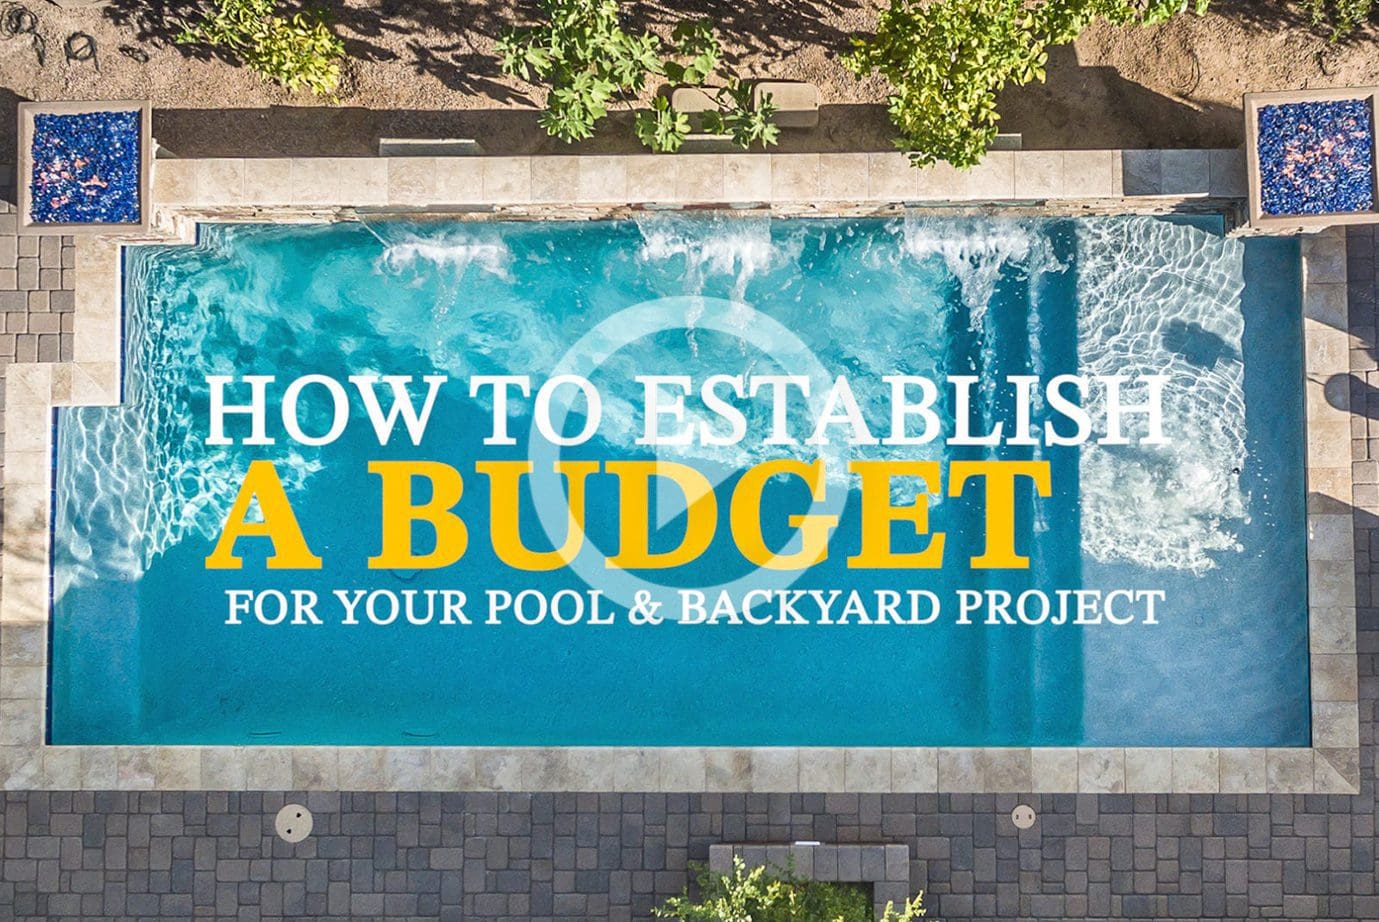 How To Establish A Budget For Your Pool & Backyard Project